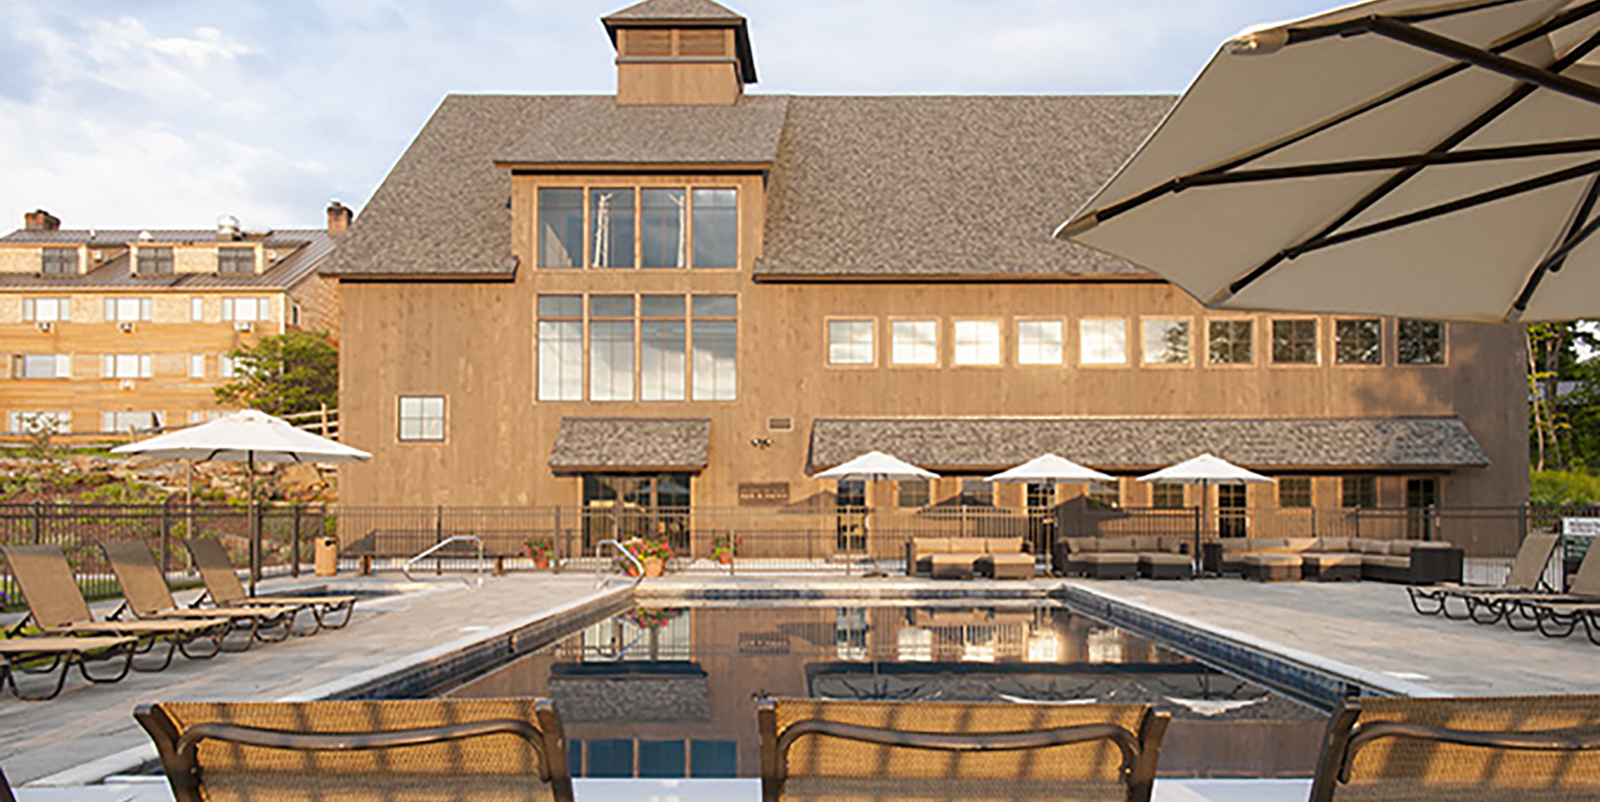 wooden exteriors of 3 story barn with windows and lodge in background, pool with tan lounge chairs and cream umbrellas in foreground